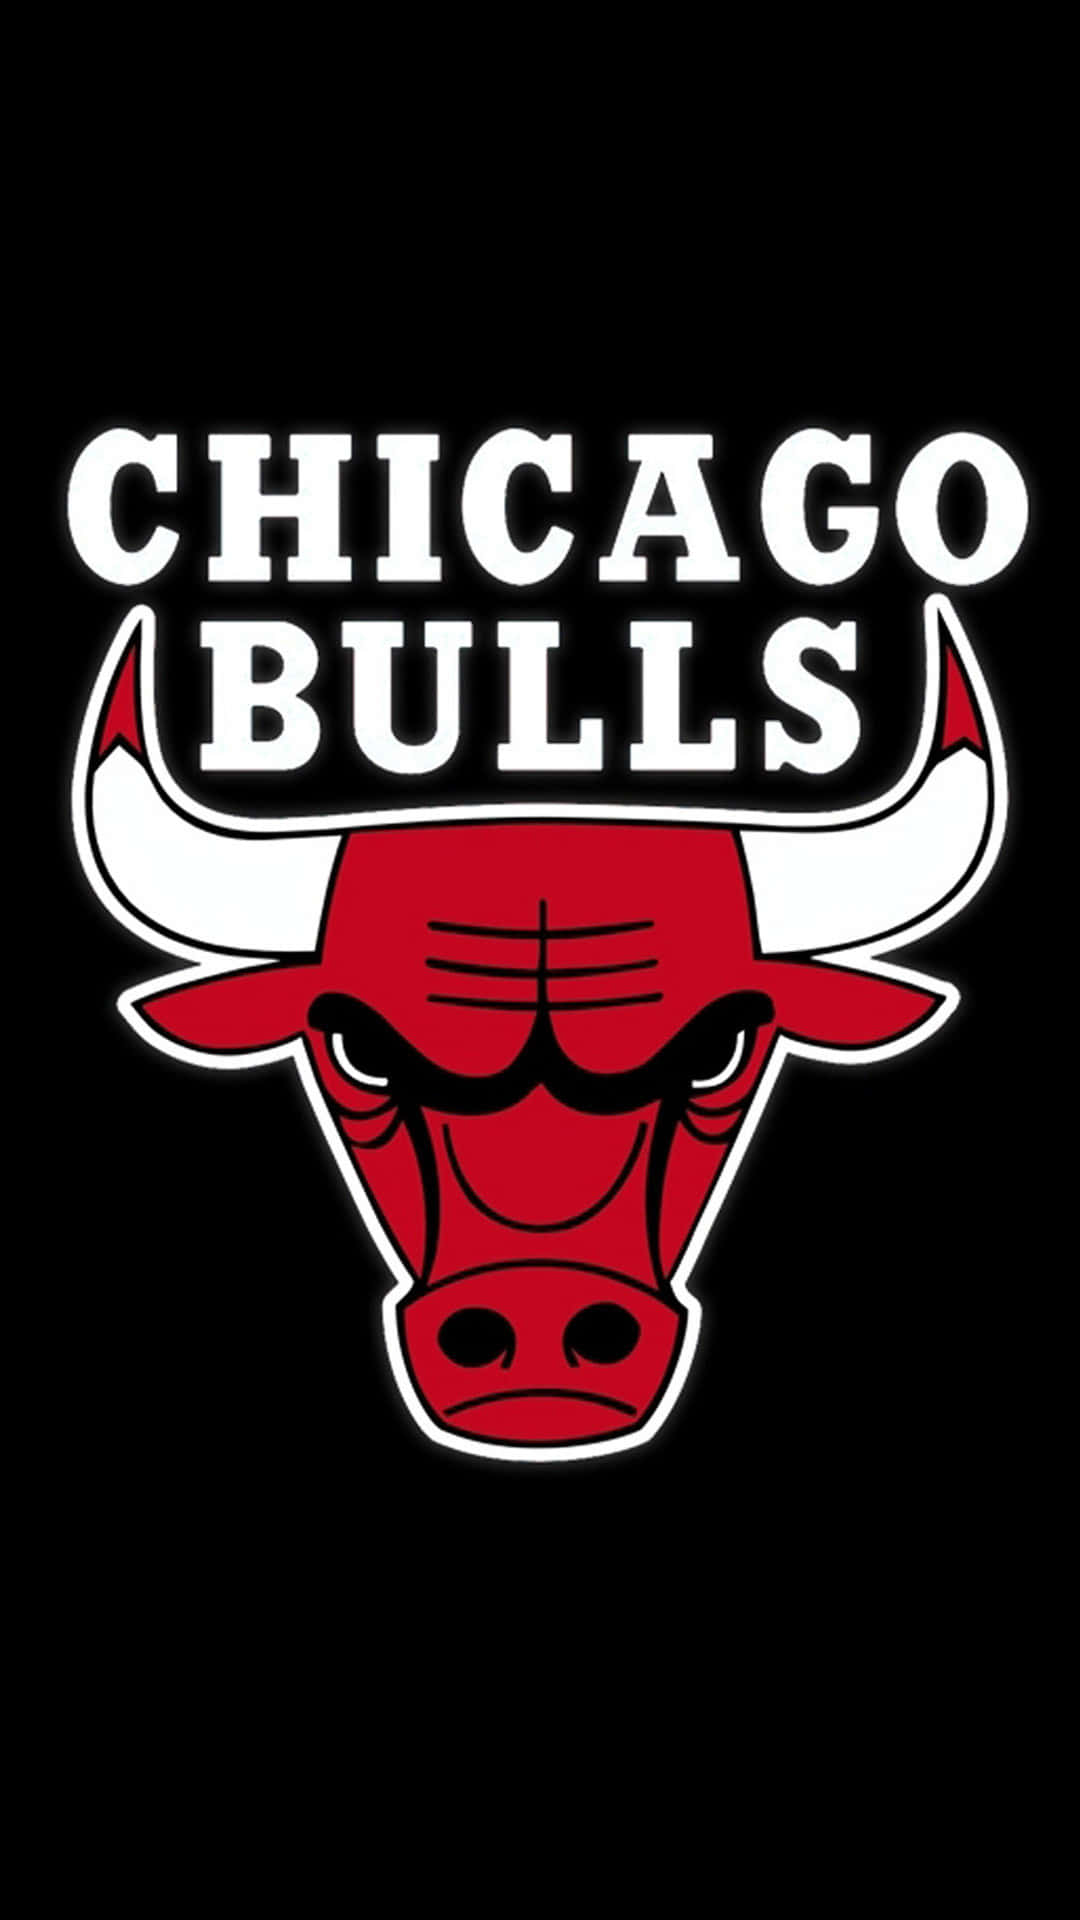 Get Ready For The Championship With The Chicago Bulls Iphone Background